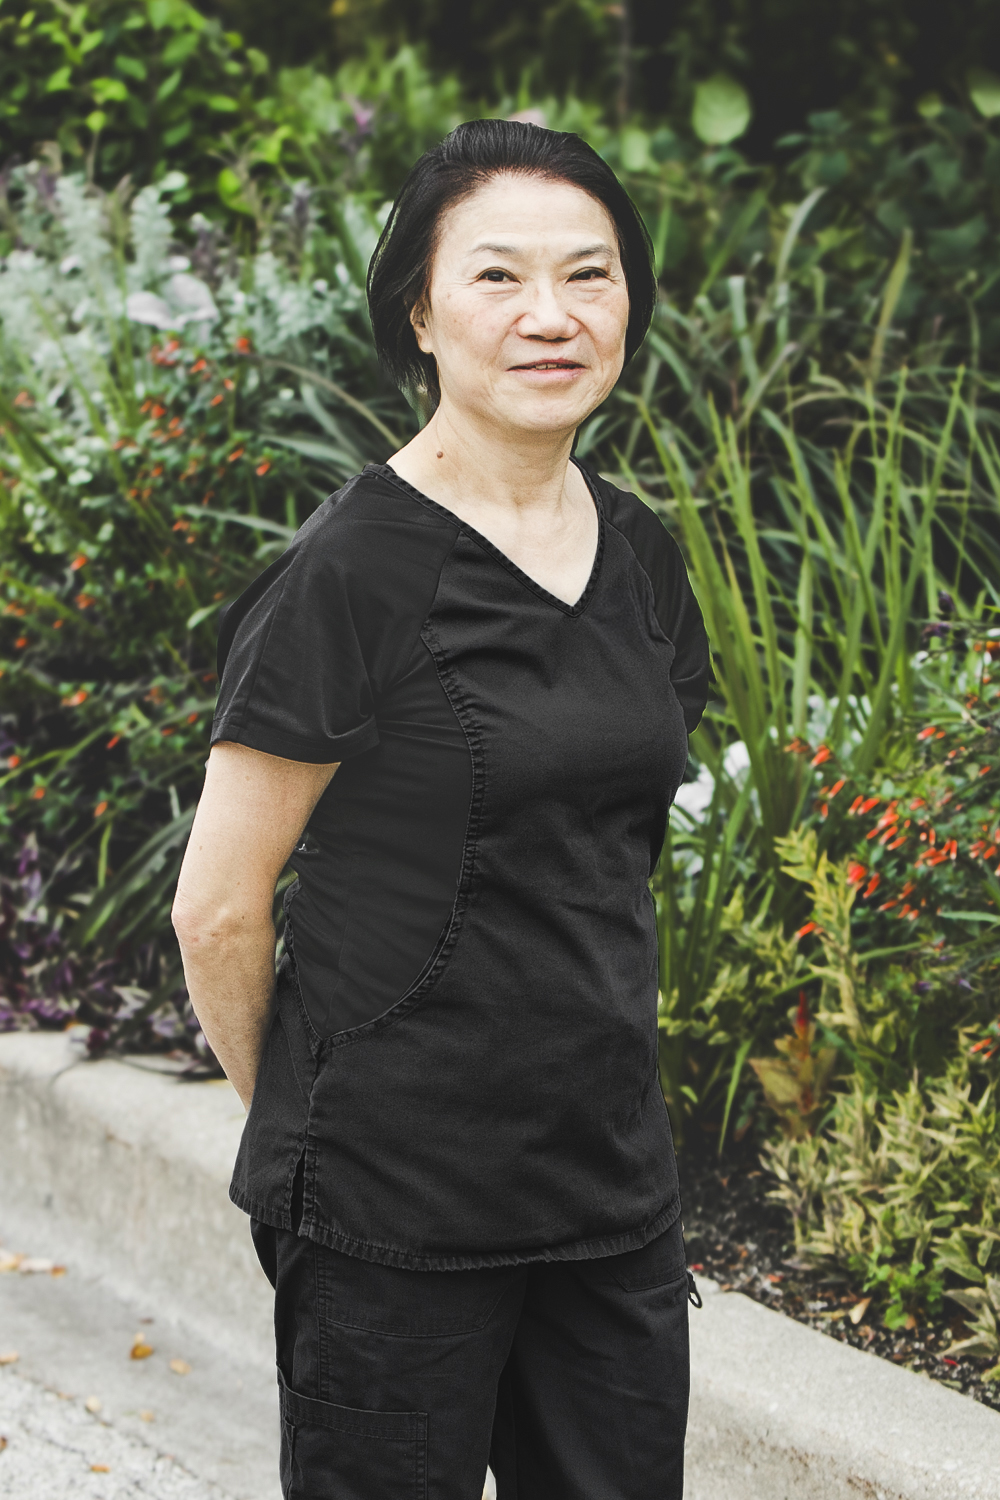 A woman with short, straight, neck-length black hair and wearing a black medical outfit is seen standing in front of an urban garden on a bright summer day